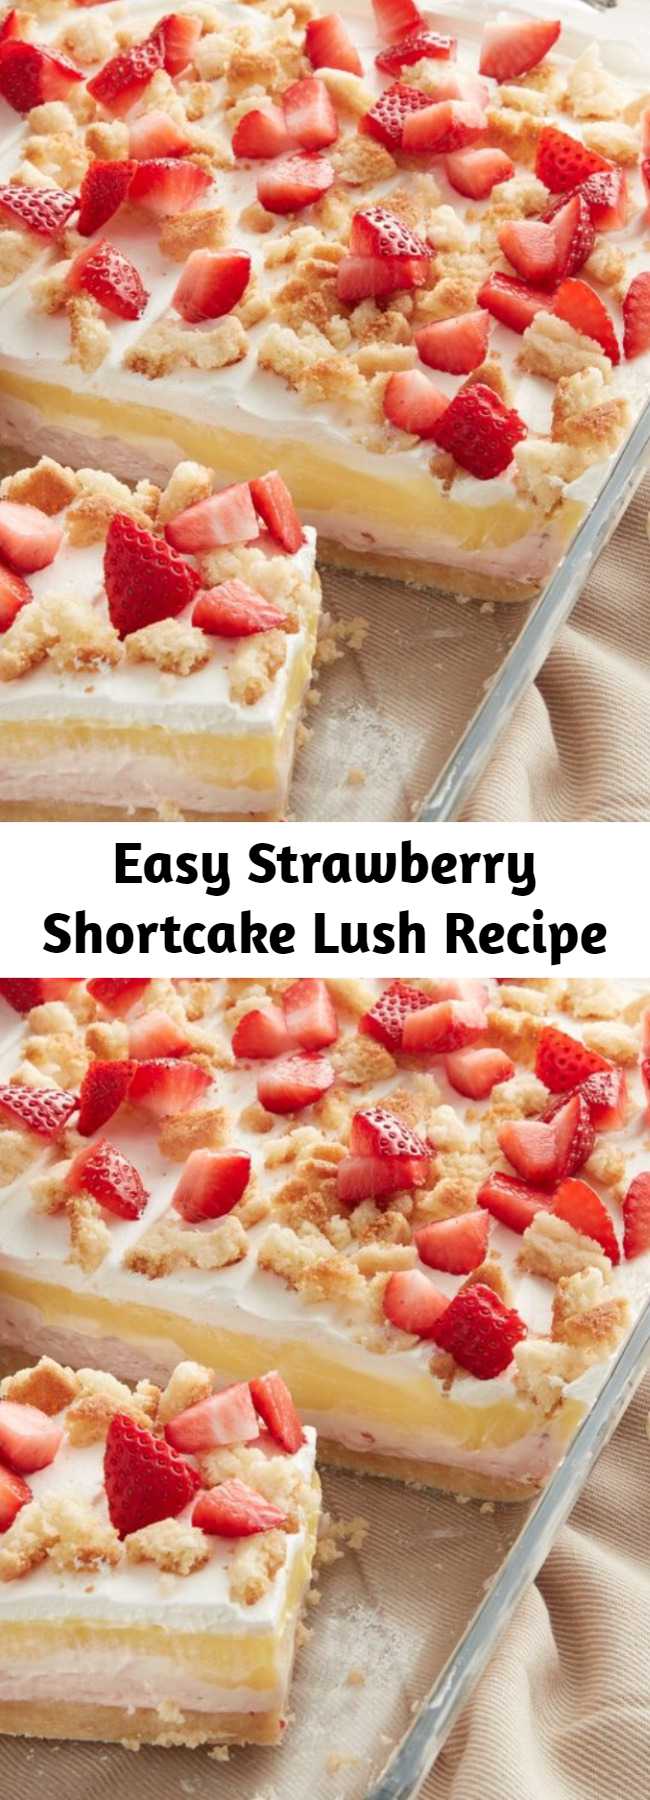 Easy Strawberry Shortcake Lush Recipe - Strawberry shortcake gets a fun makeover that's perfect for sharing with a crowd. With a sugar cookie crust, cool layers of sweet strawberry cream cheese, vanilla pudding and whipped topping, plus a finishing sprinkle of fresh strawberries, it's summer in a dessert! #dessert #summer